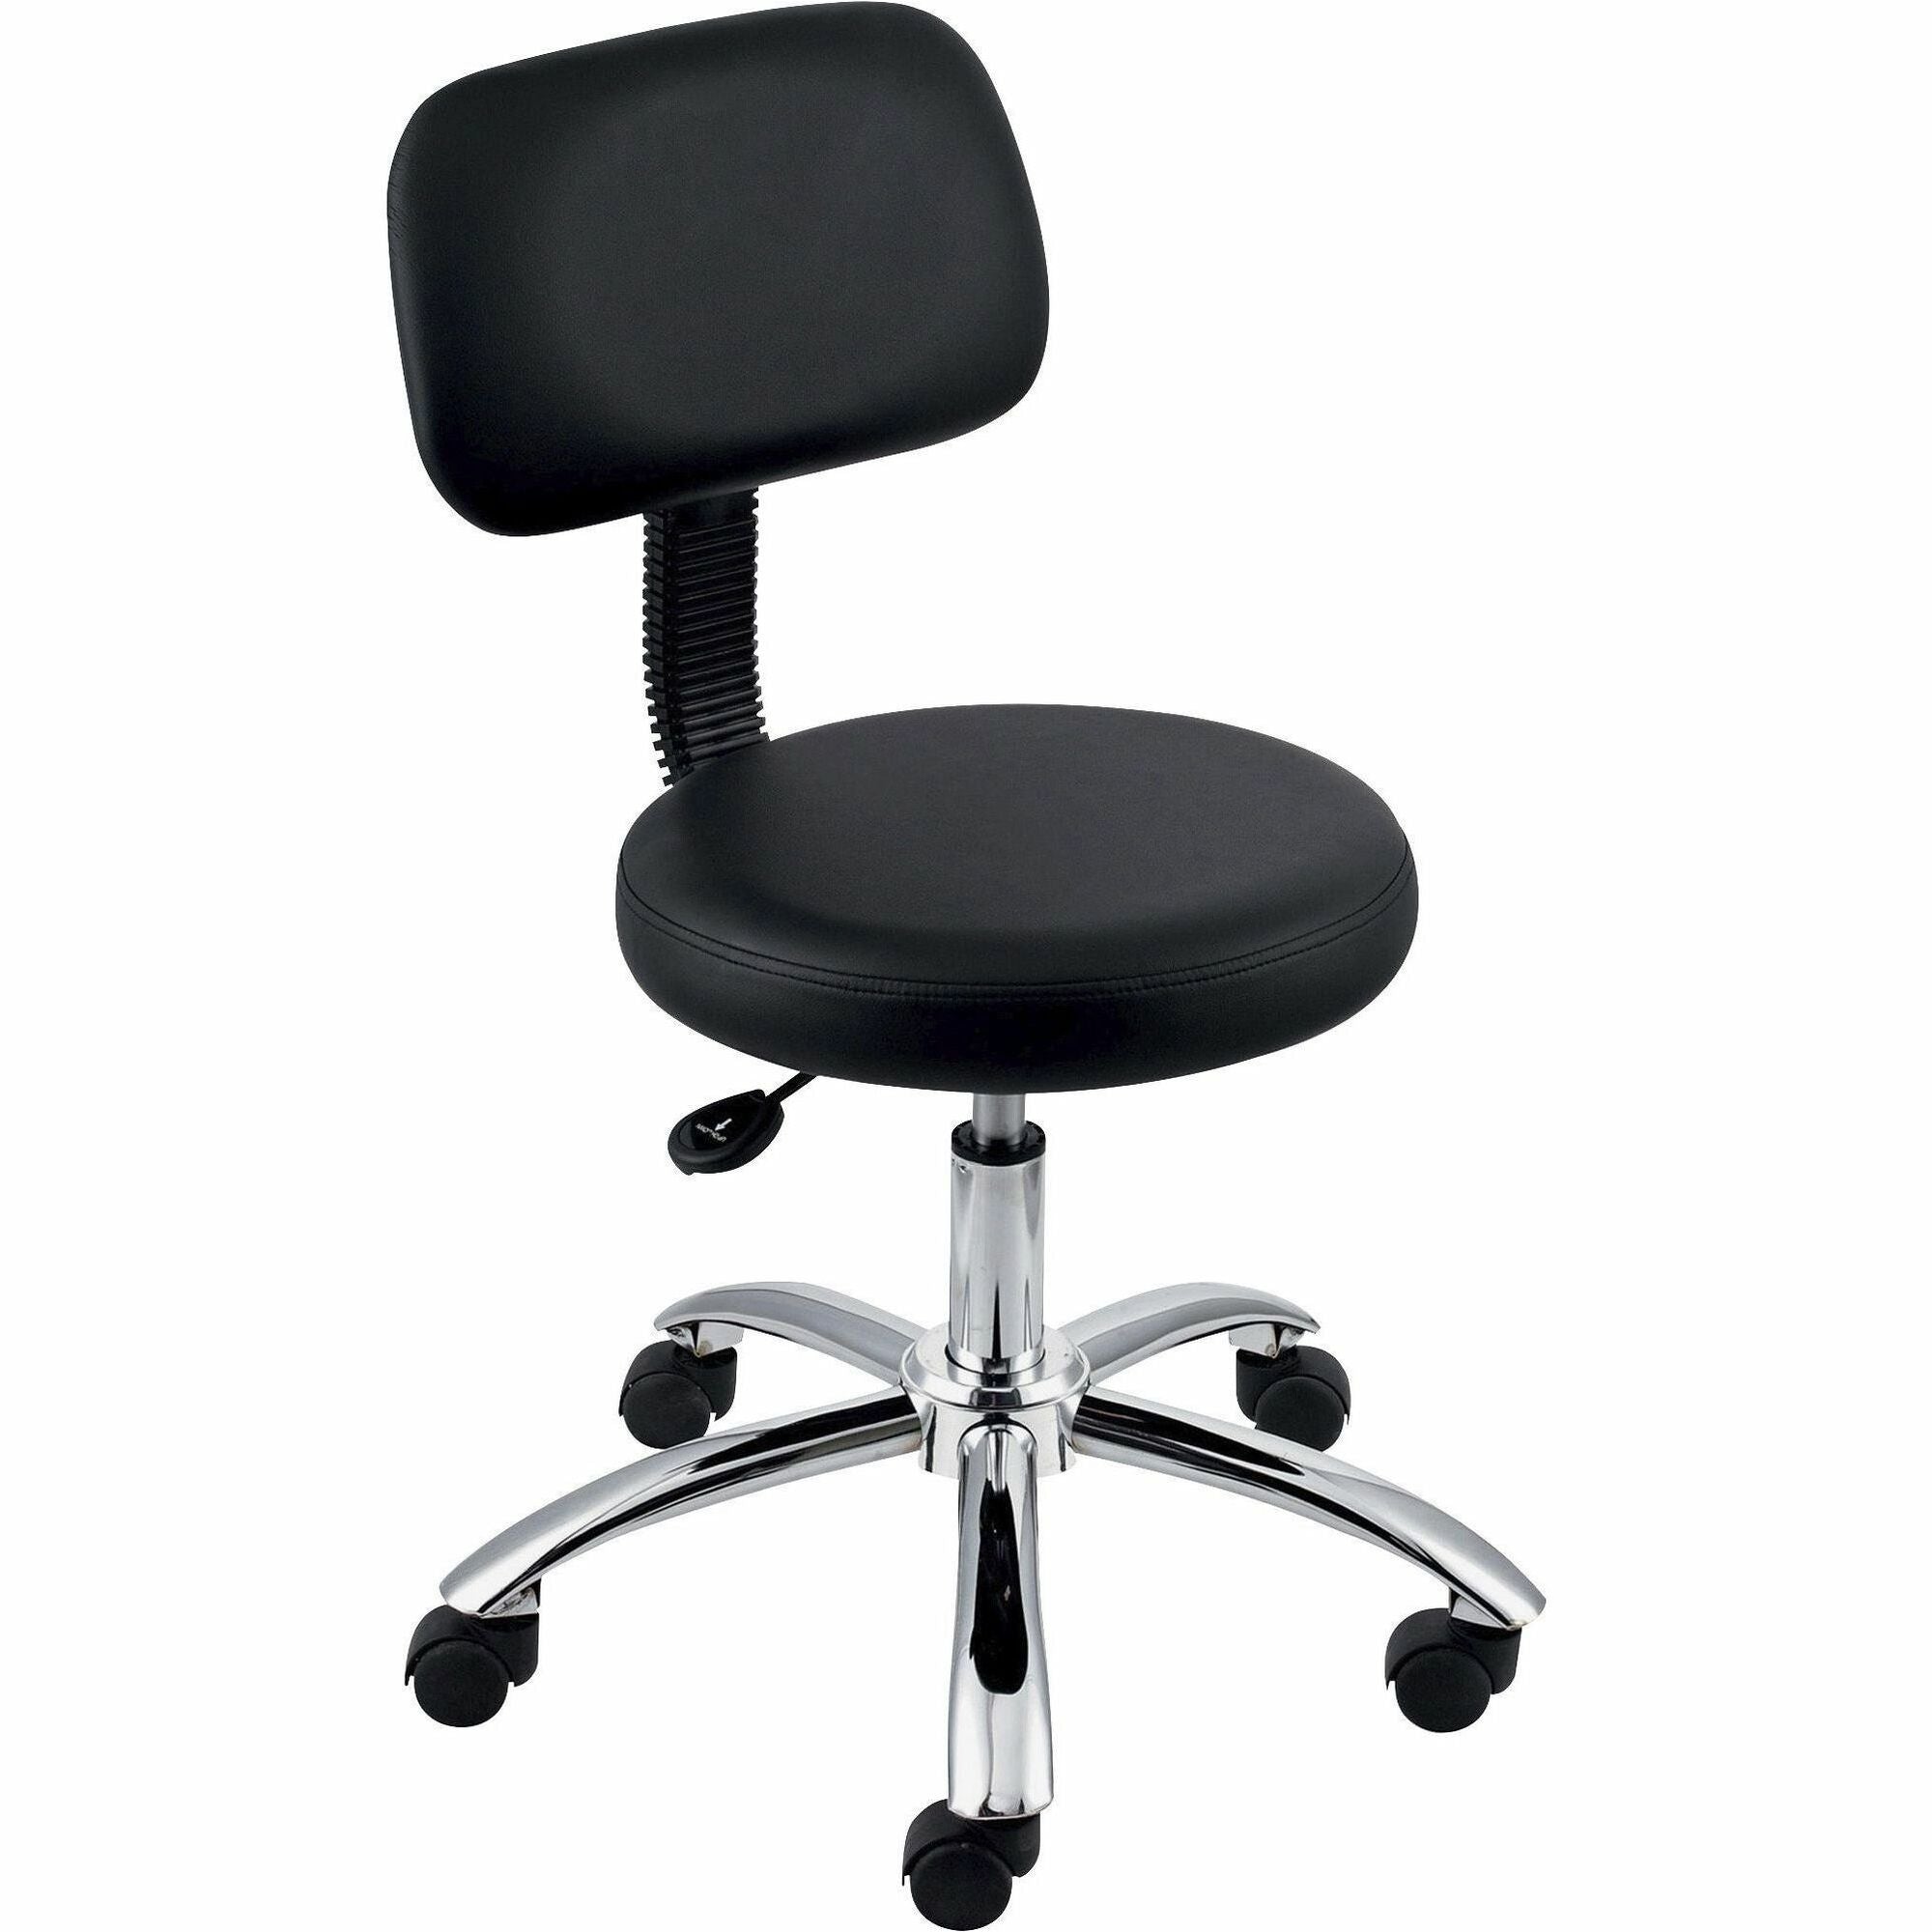 Lorell 16" Round Seat Pneumatic-Lift Stool with Back - Vinyl Seat - 5-star Base - Black - 1 Each - 